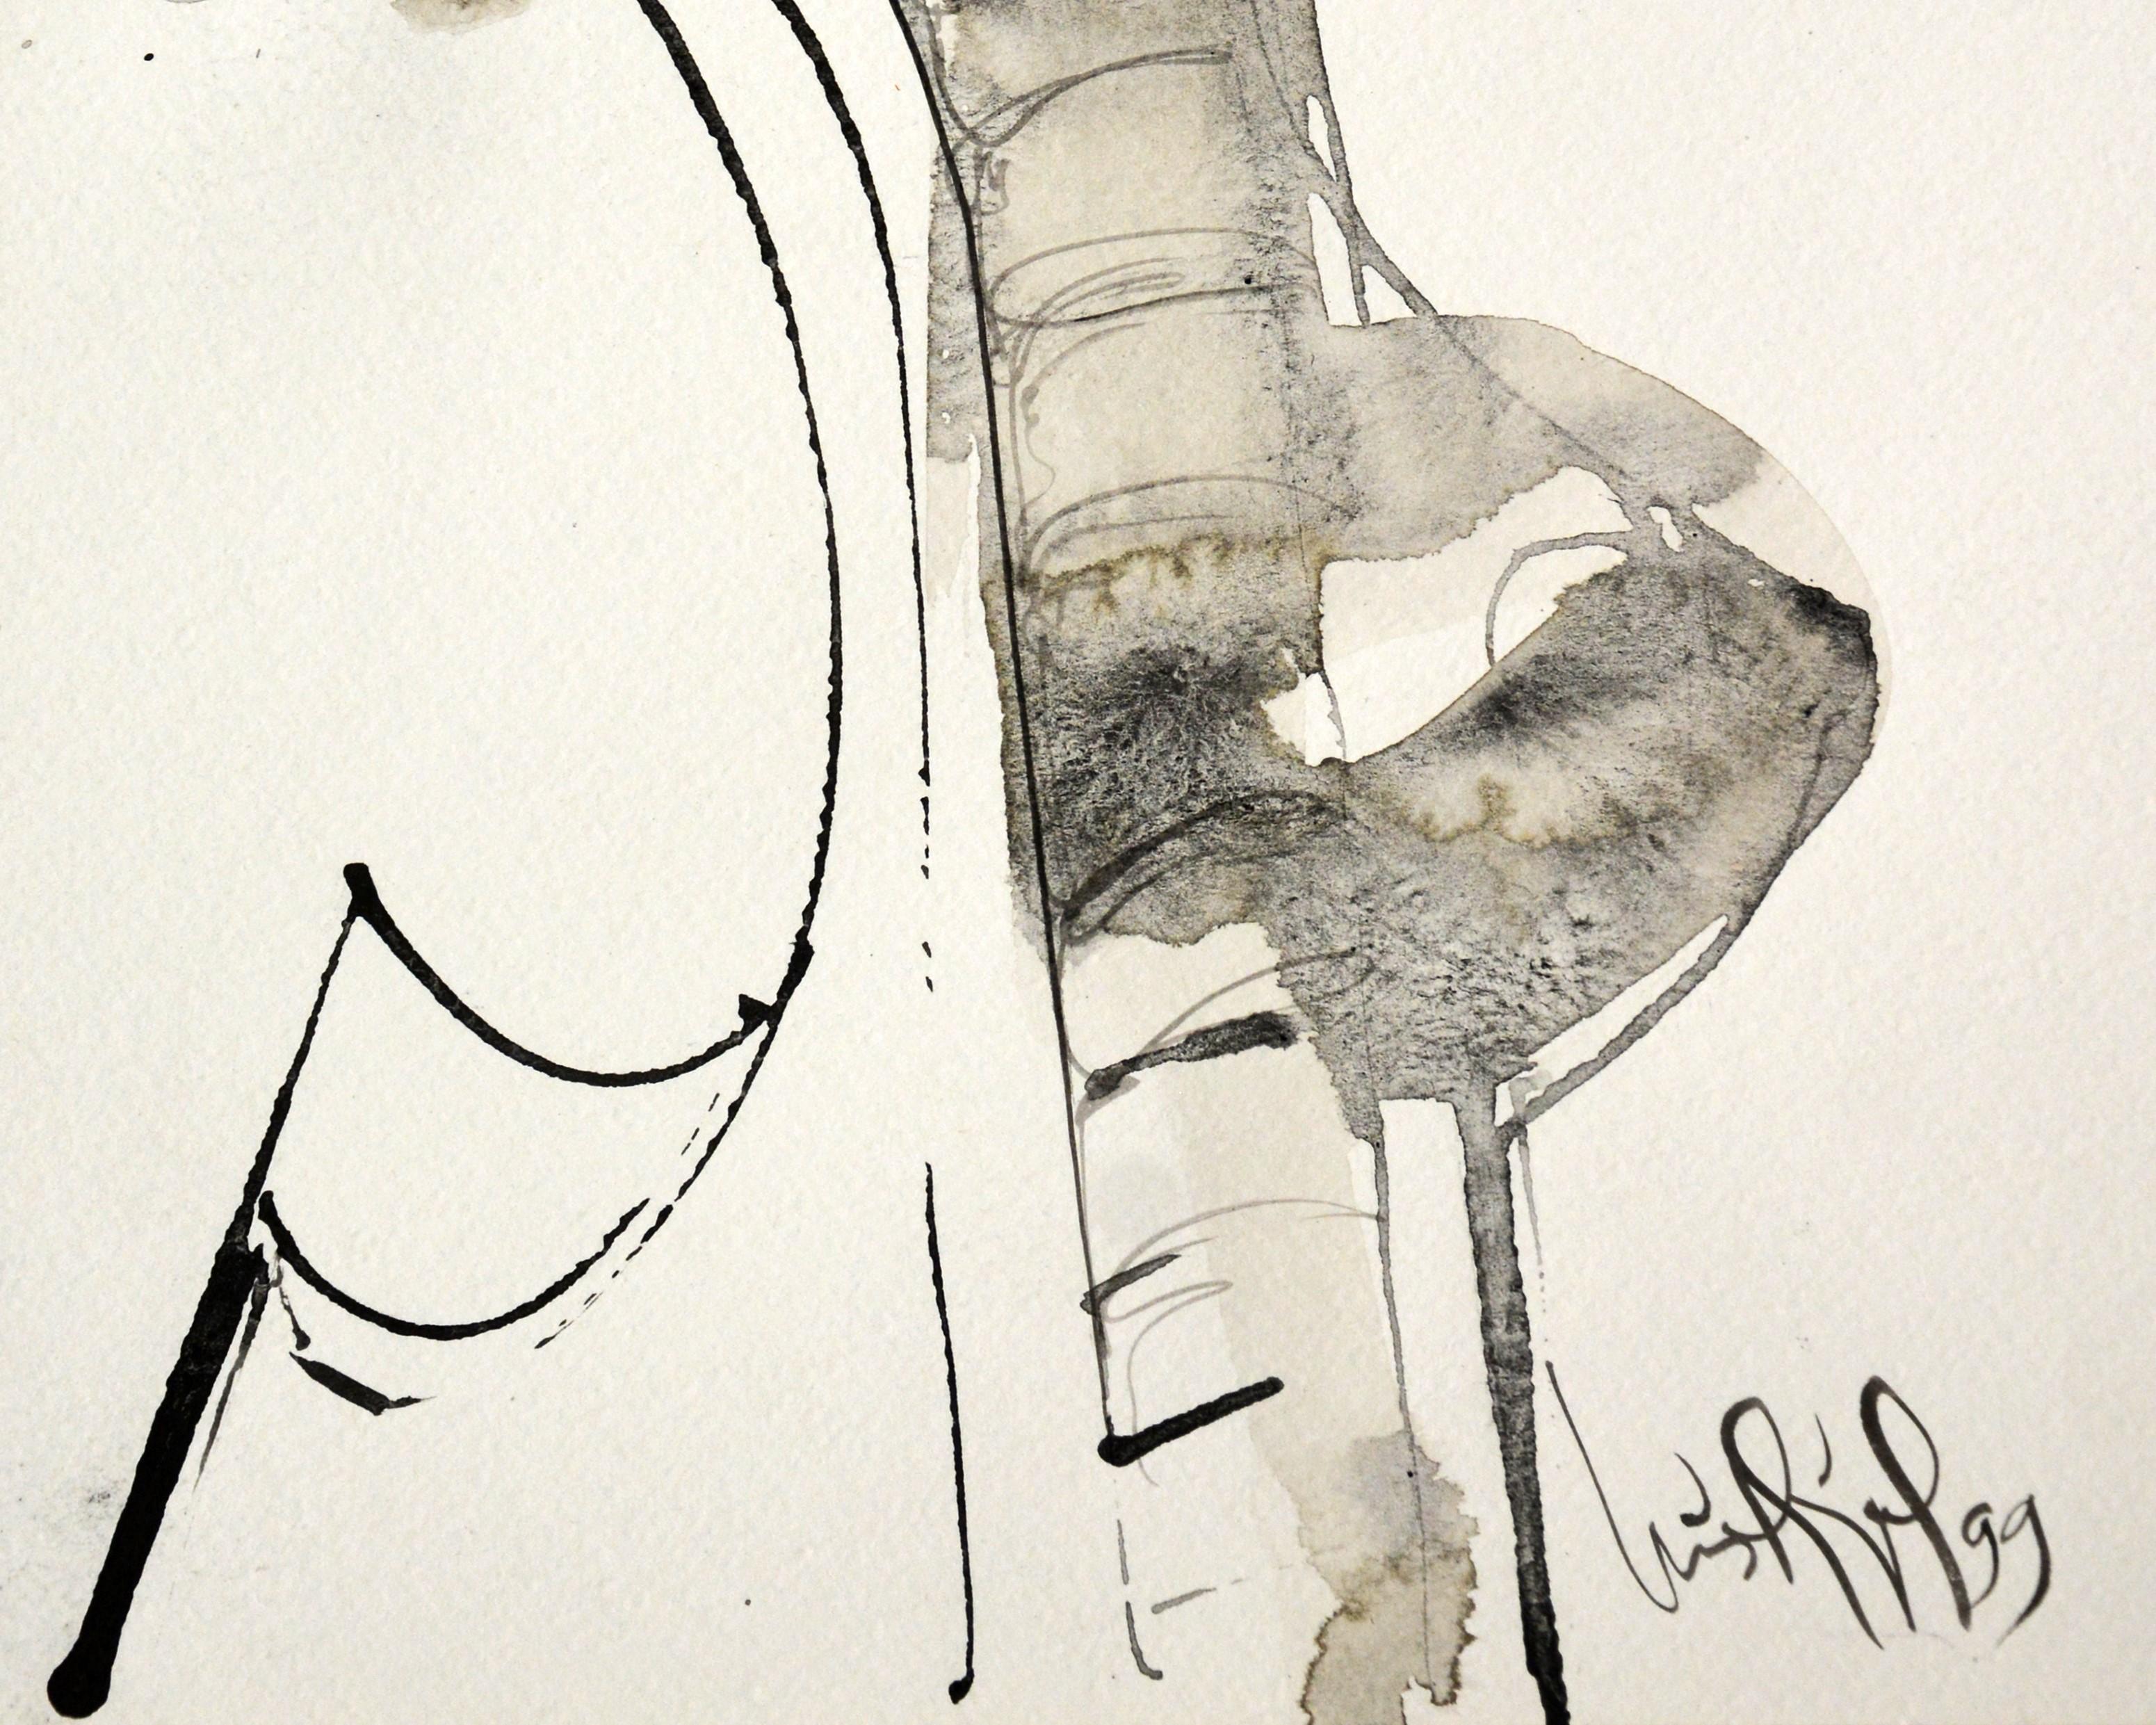 Luis Miguel Valdes, ¨Perfil-2¨, 1999, Work on paper, 15.7x11.8 in - Contemporary Art by Luis Miguel Valdes 